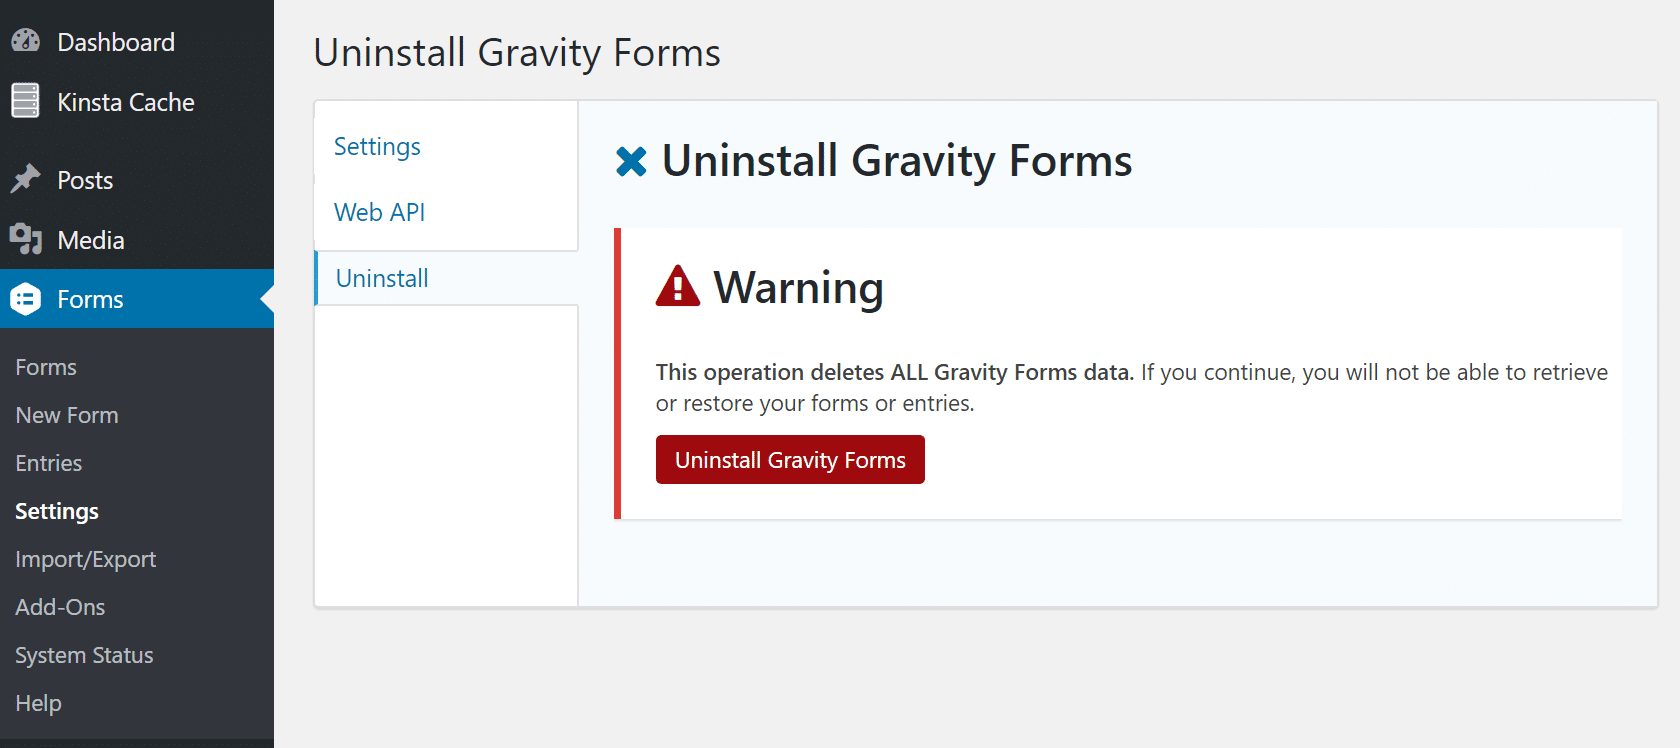 Uninstall Gravity Forms